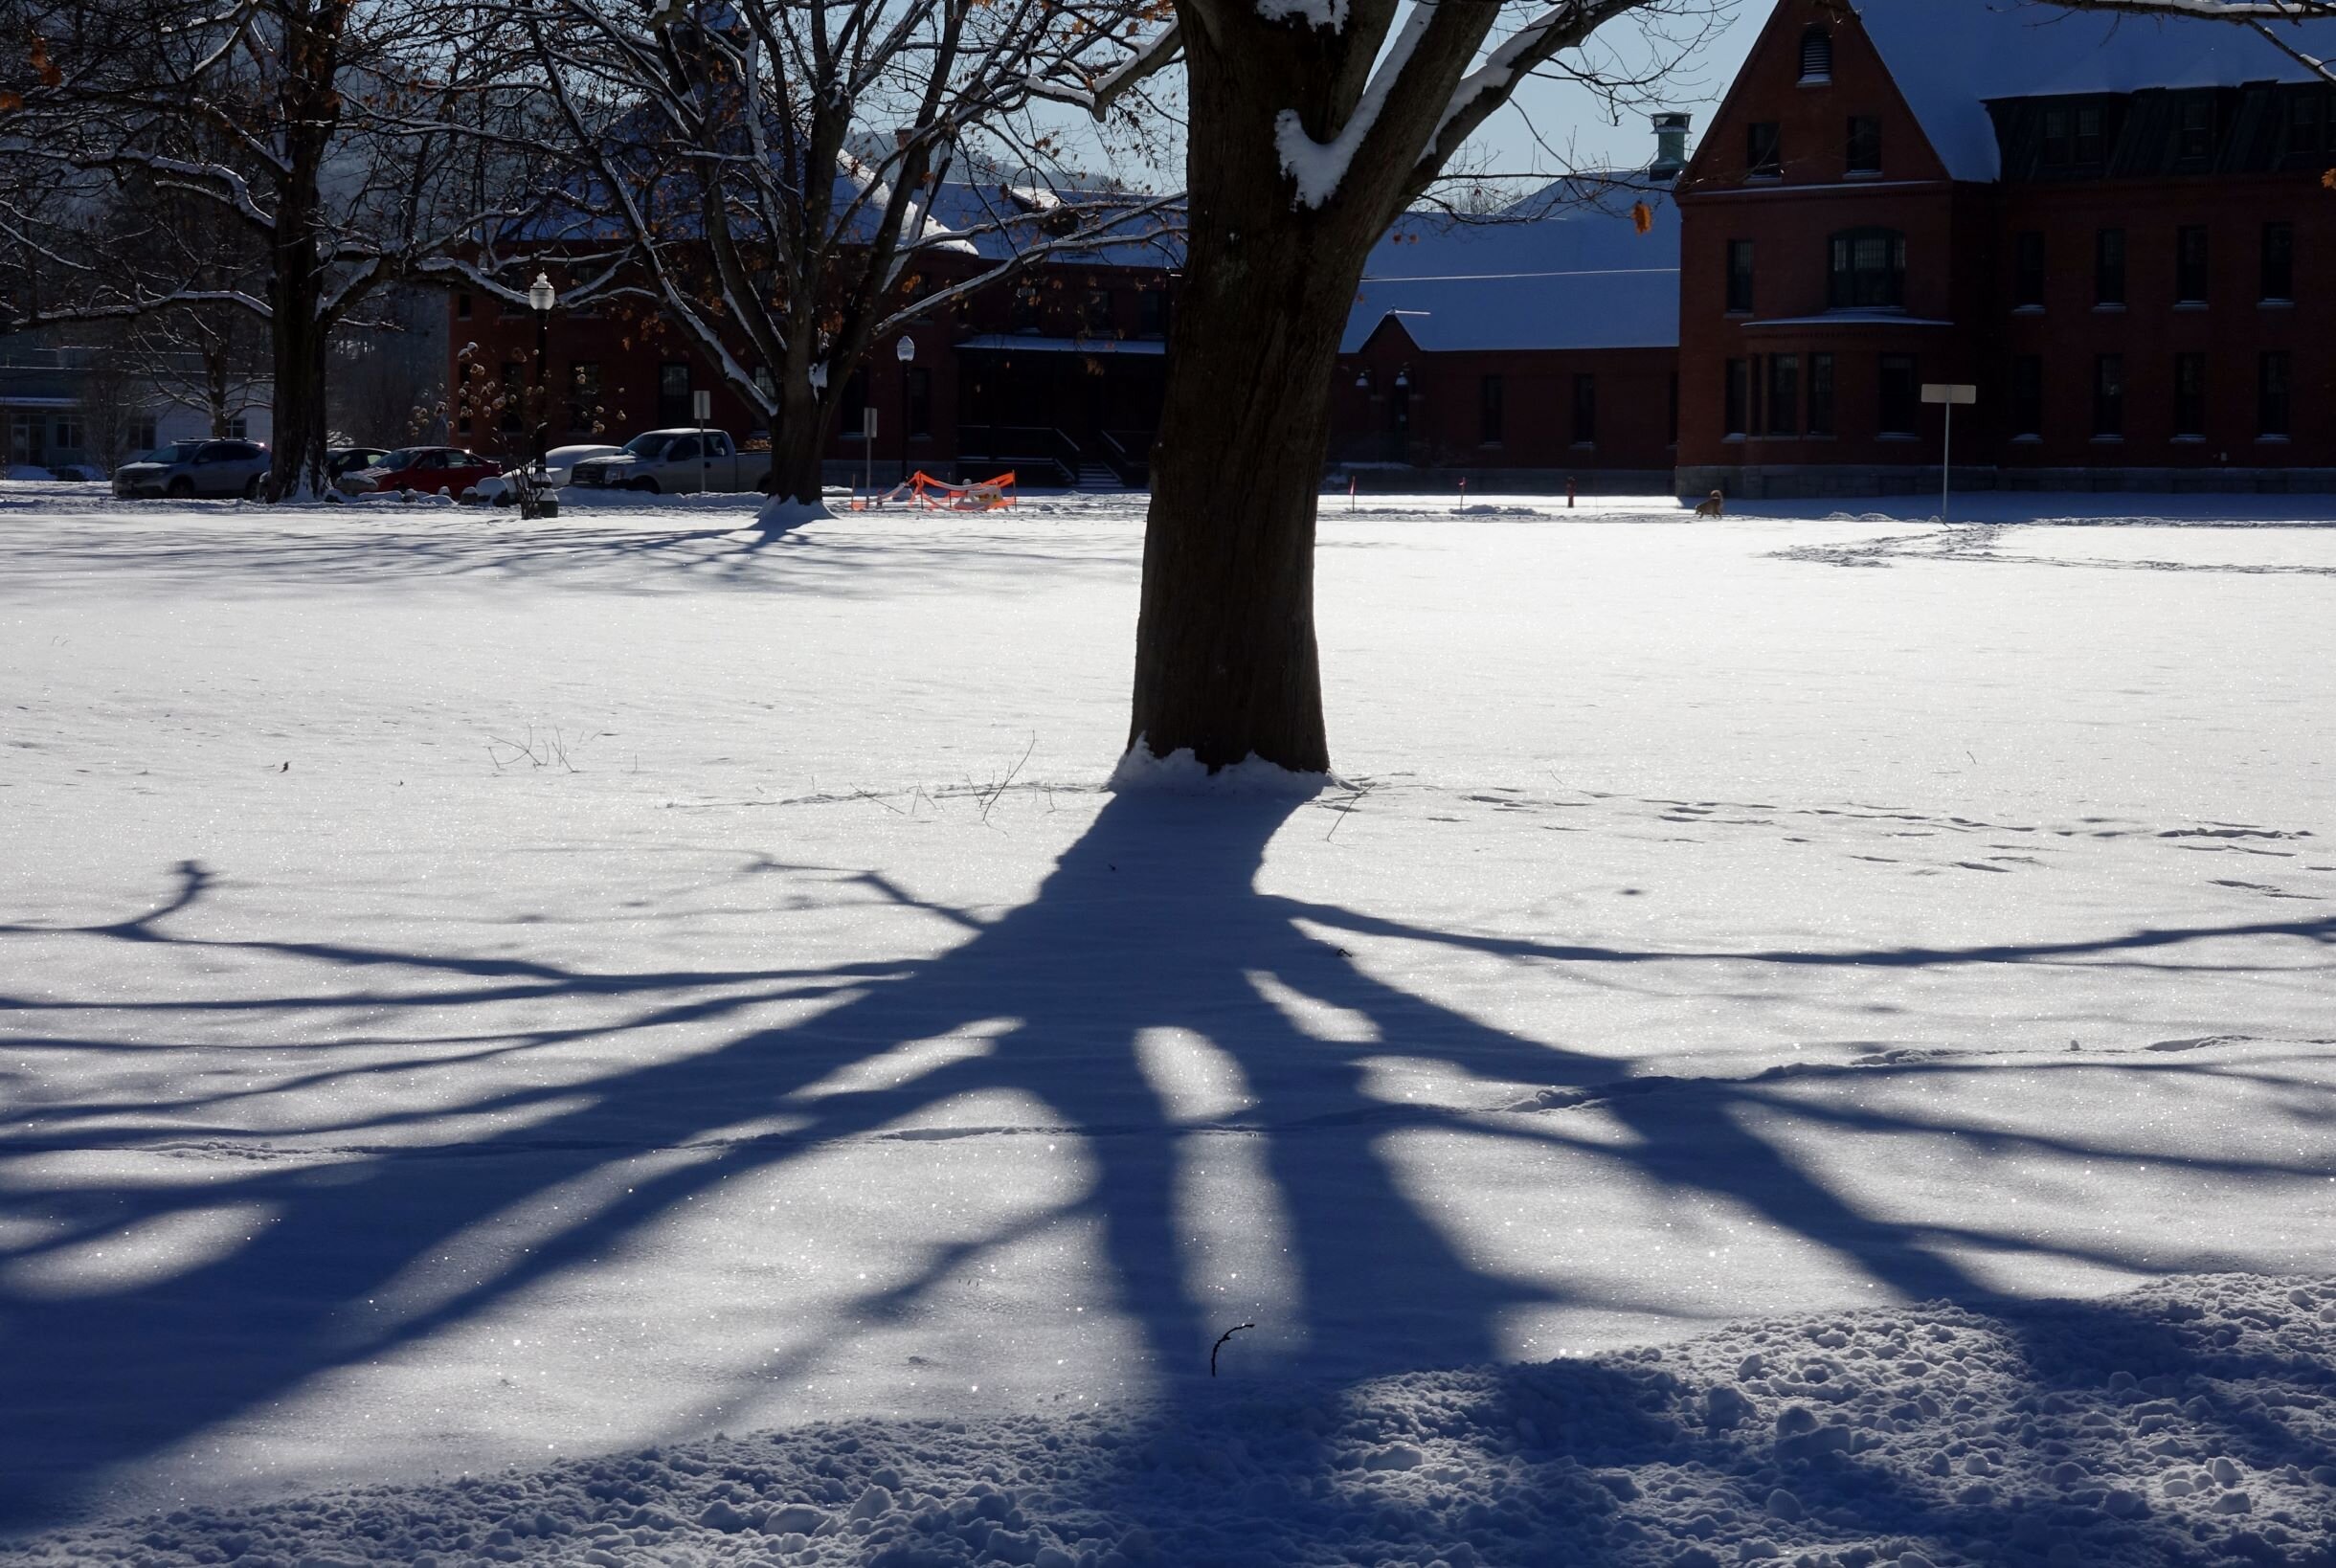   The days around Winter Solstice bring the longest shadows of the year like these on the state complex lawn. Photo by Gordon Miller.   